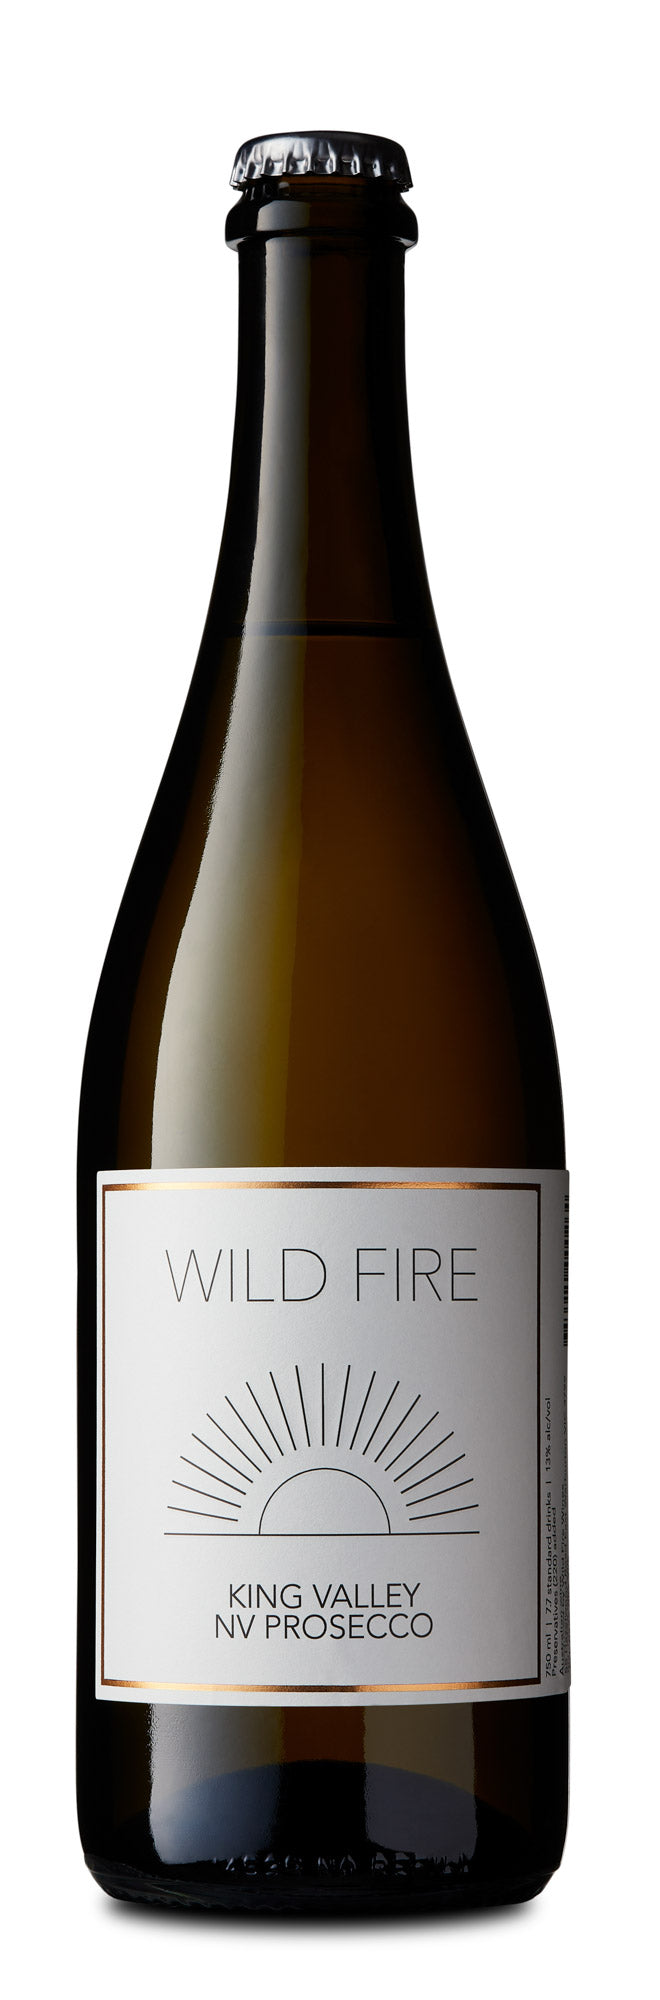 Wild Fire King Valley Prosecco NV